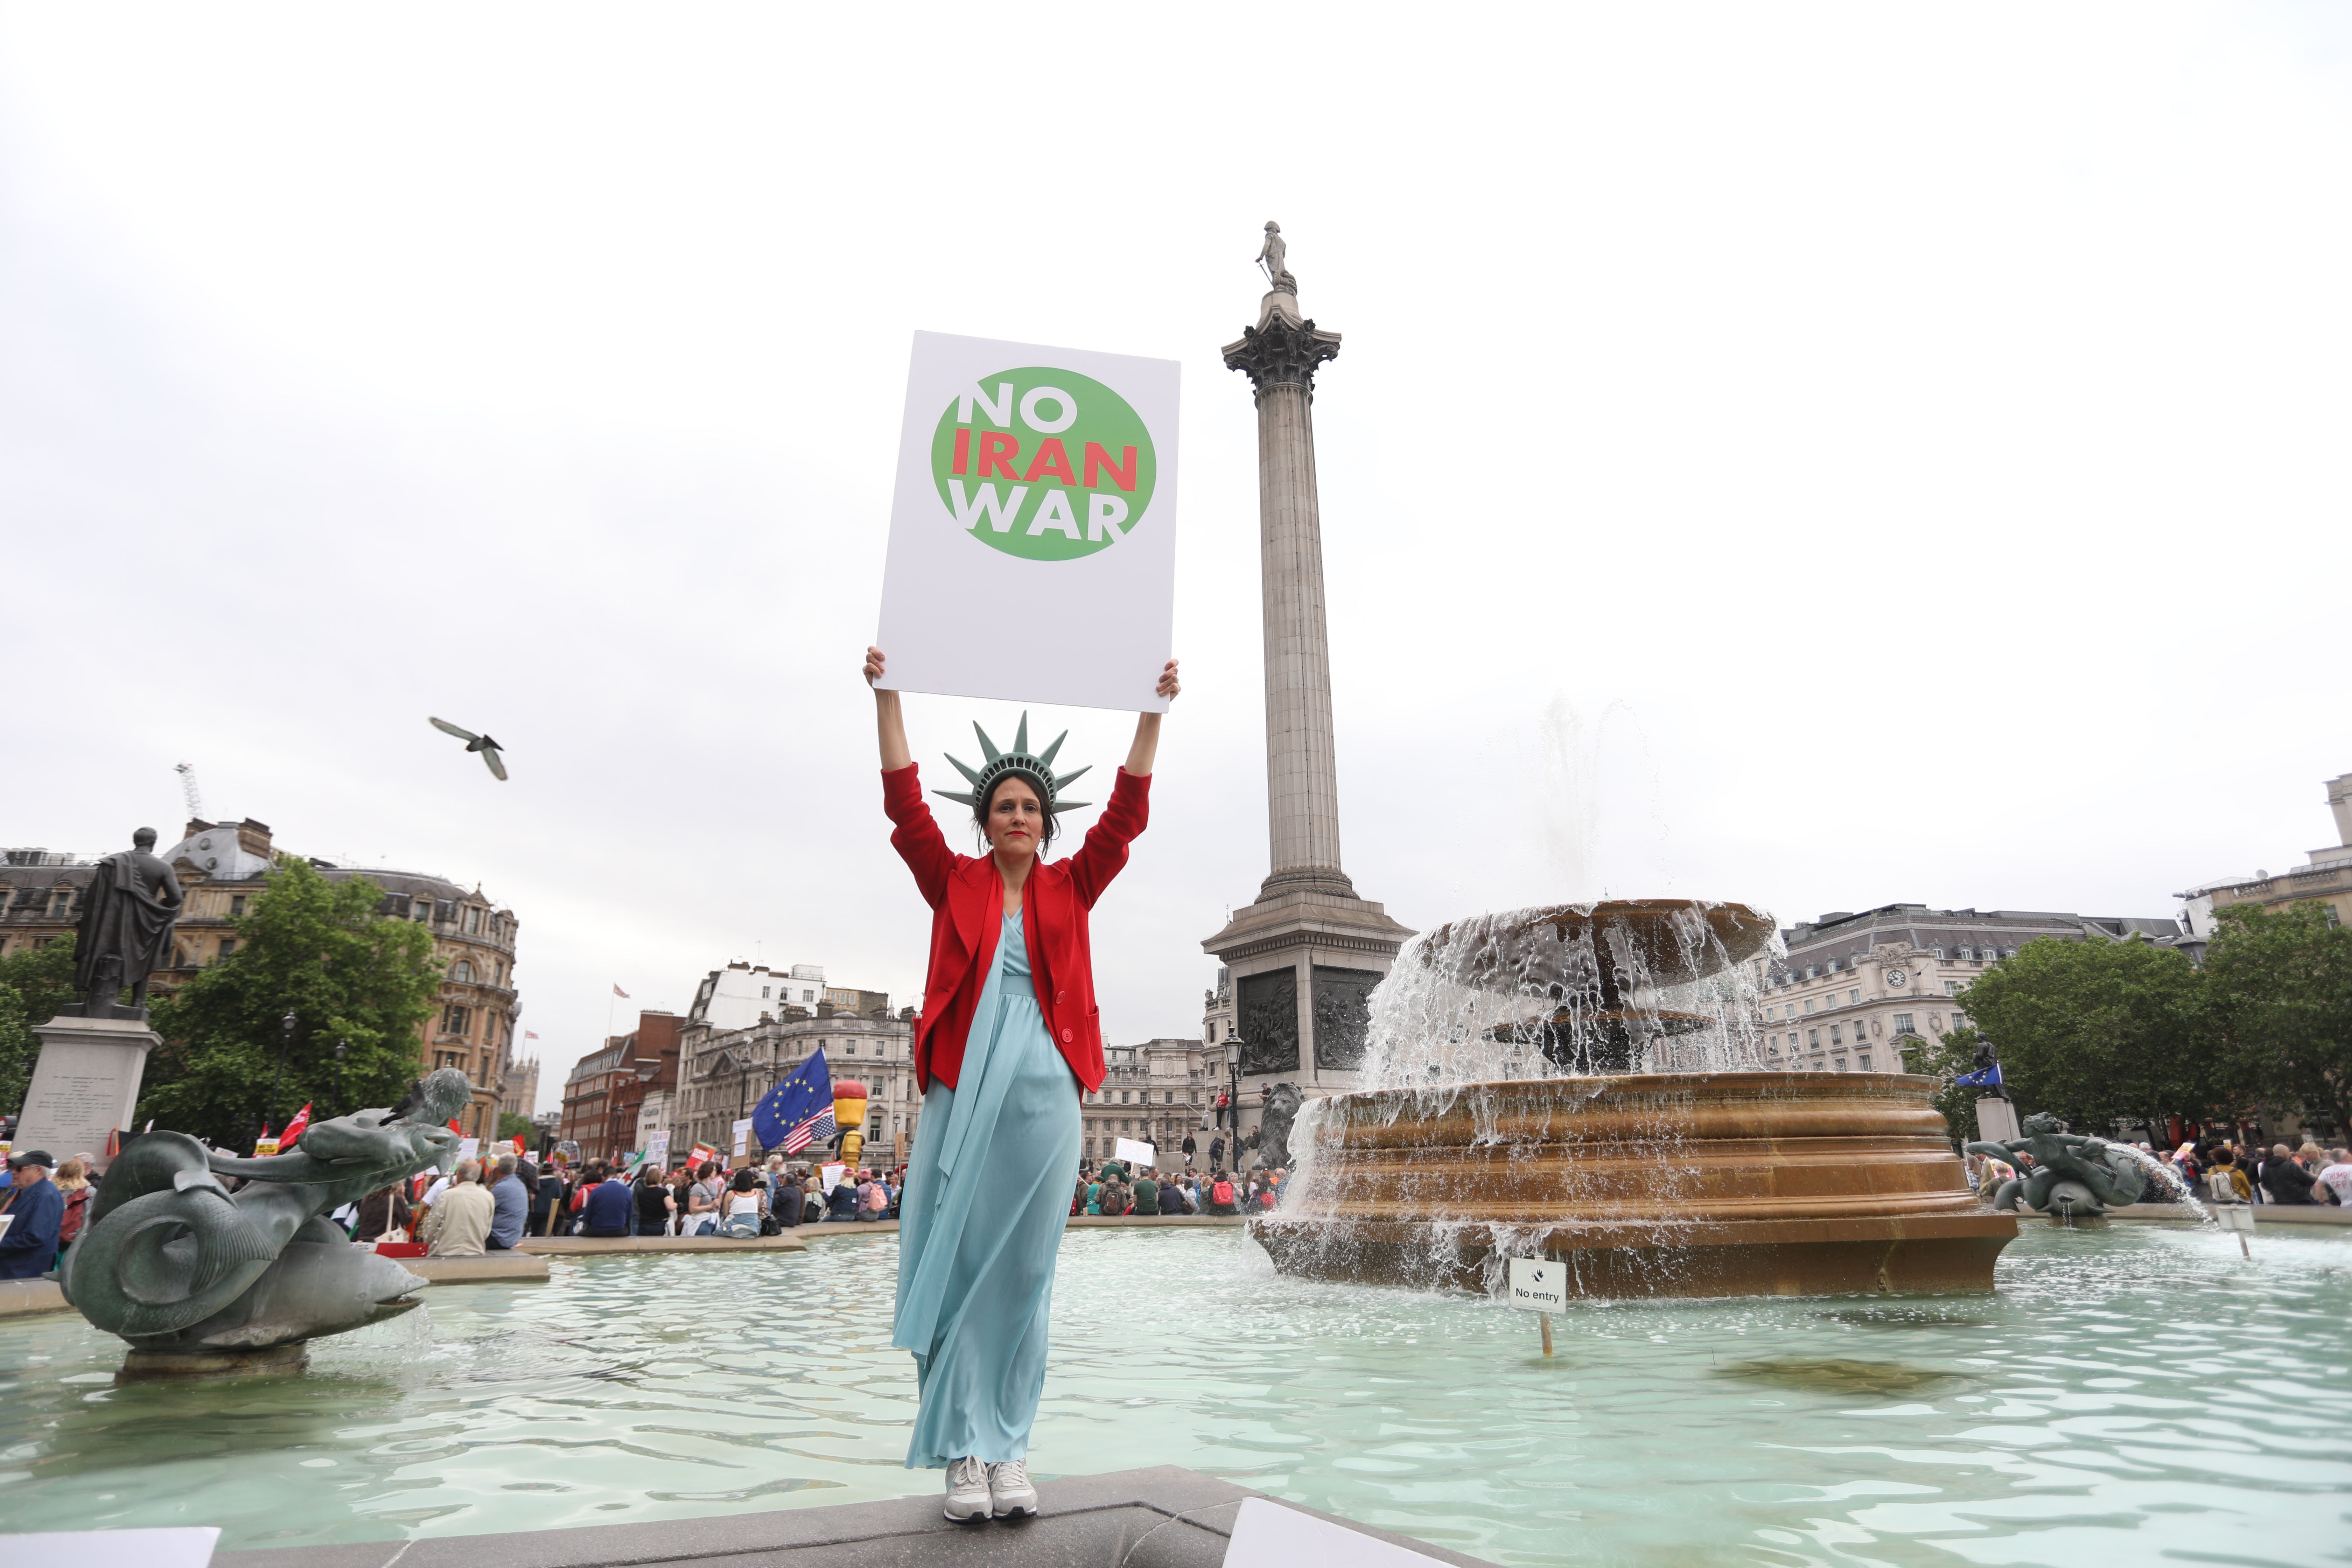 A demonstrator holds up a placard as protesters against the US president's State Visit gather in Trafalgar Square in central London on June 4, 2019.